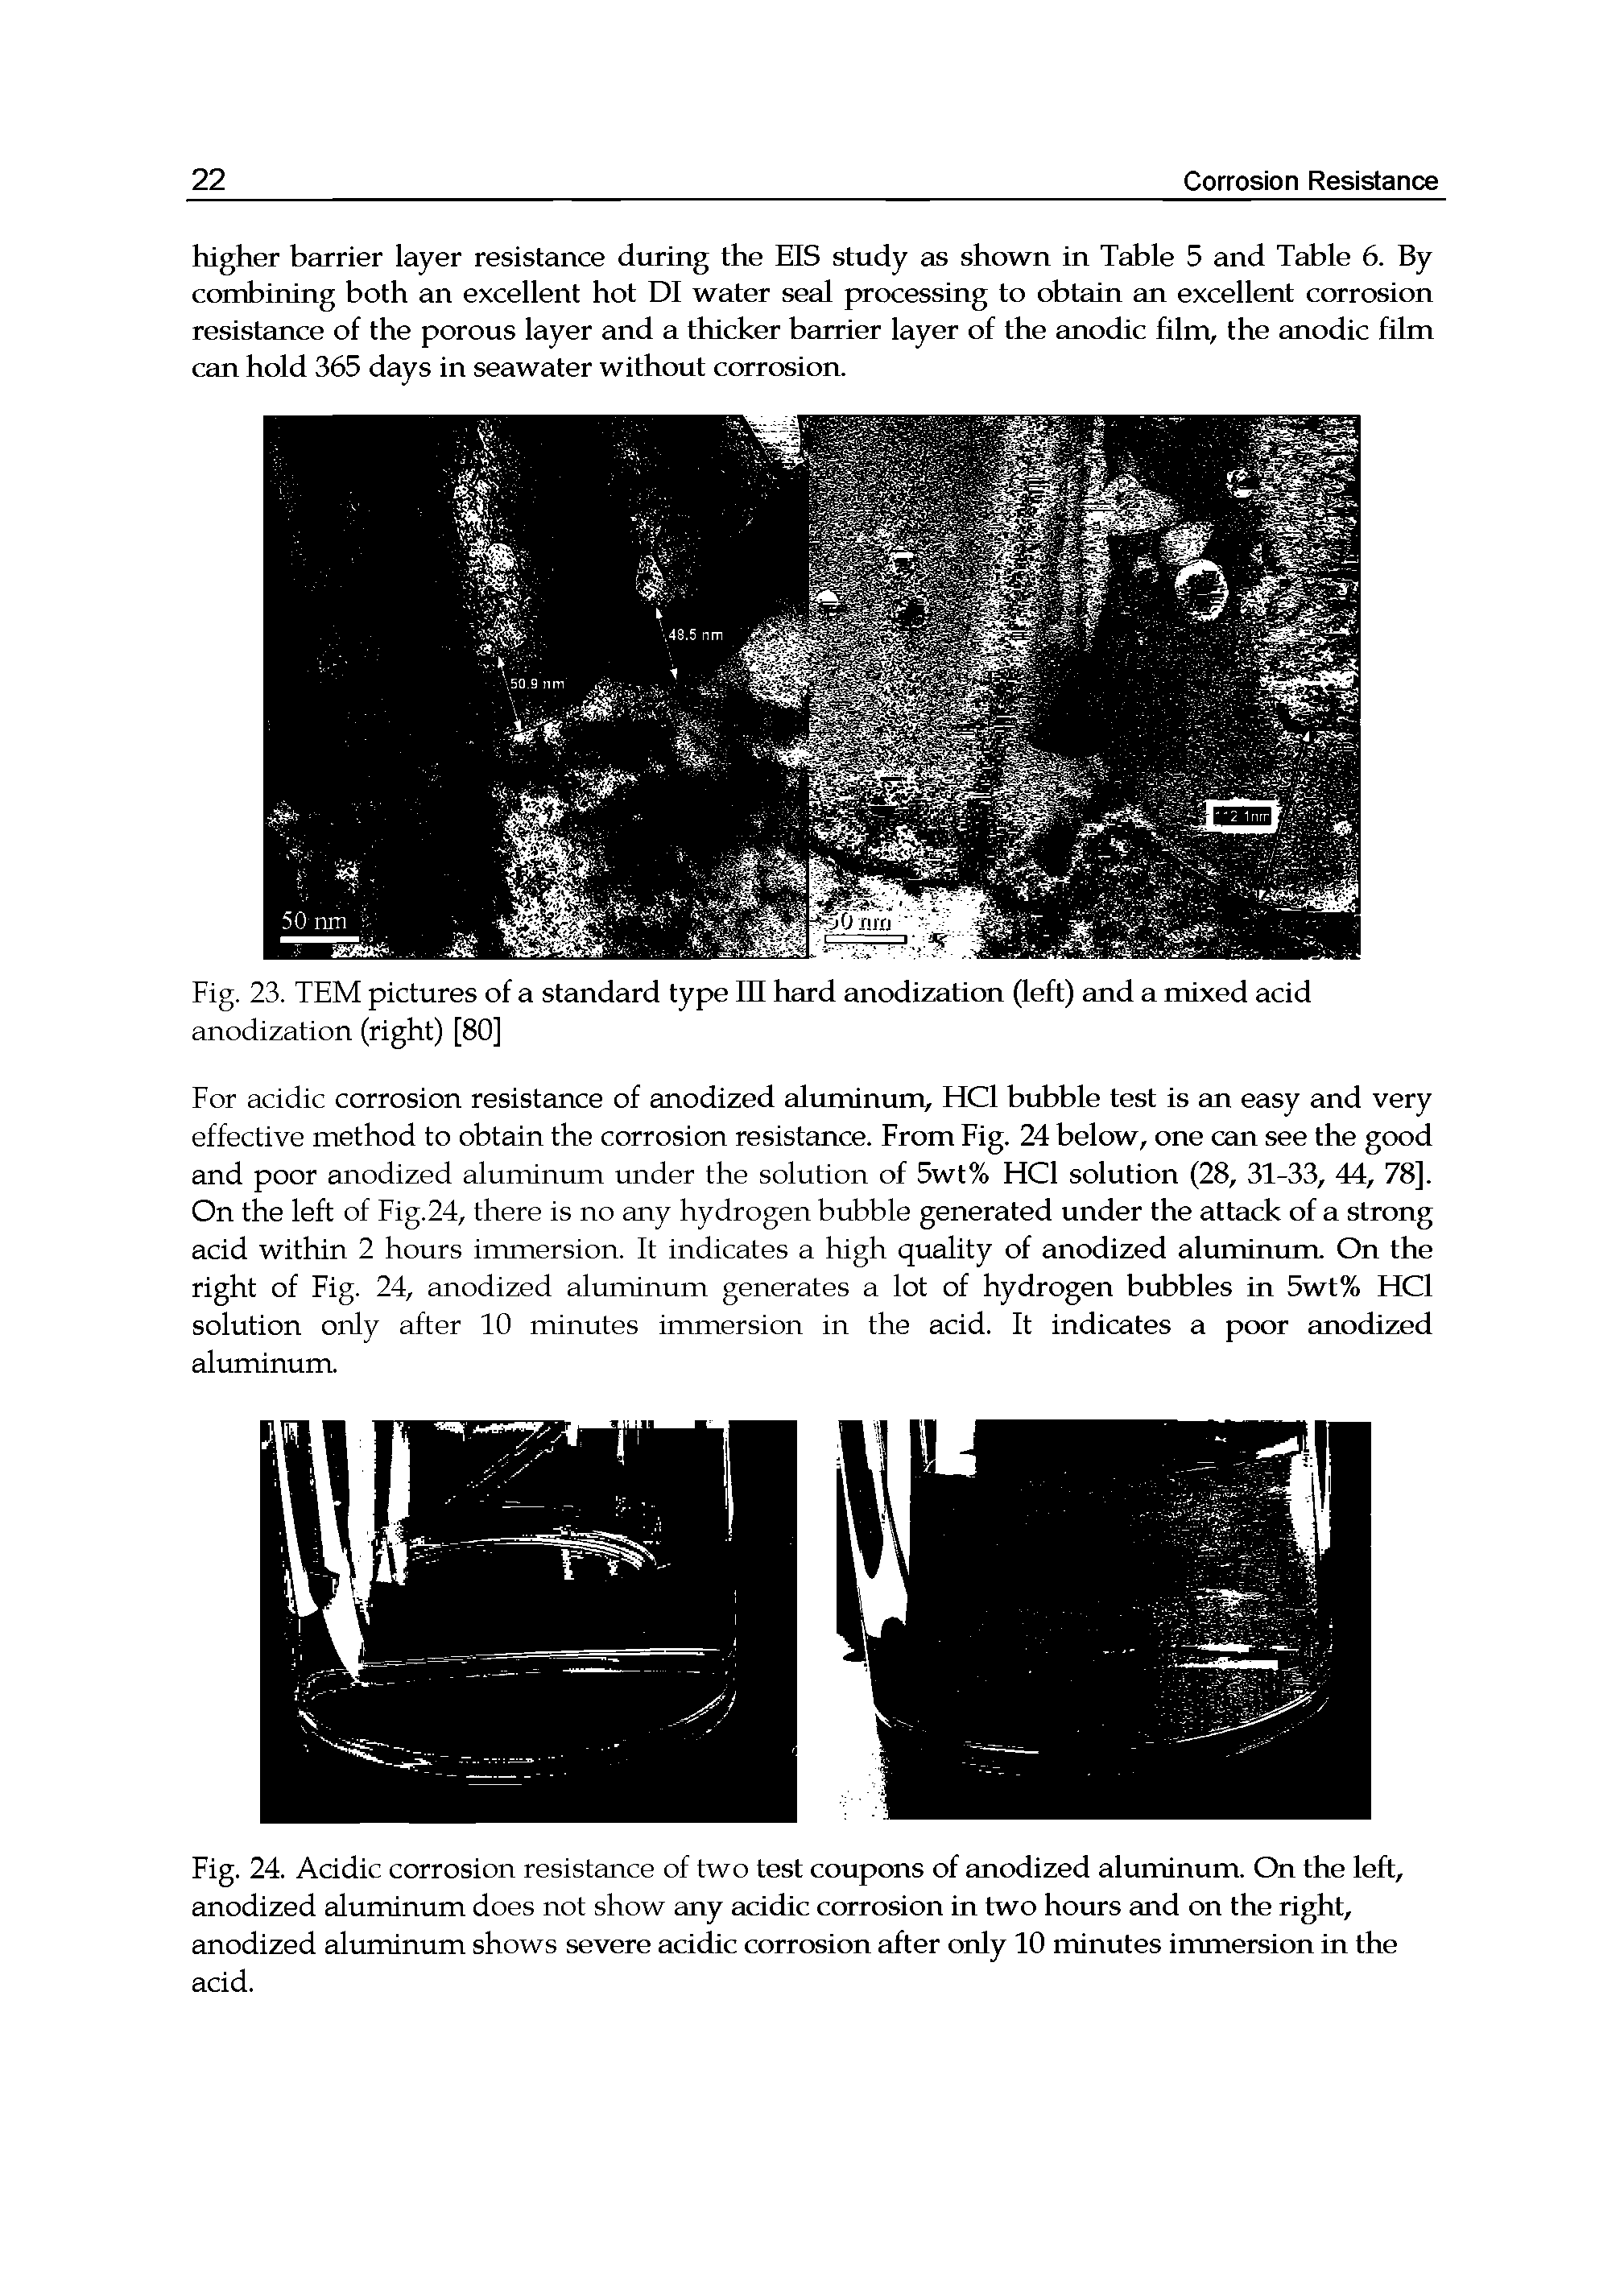 Fig. 23. TEM pictures of a standard type lit hard anodization (left) and a mixed acid anodization (right) [80]...